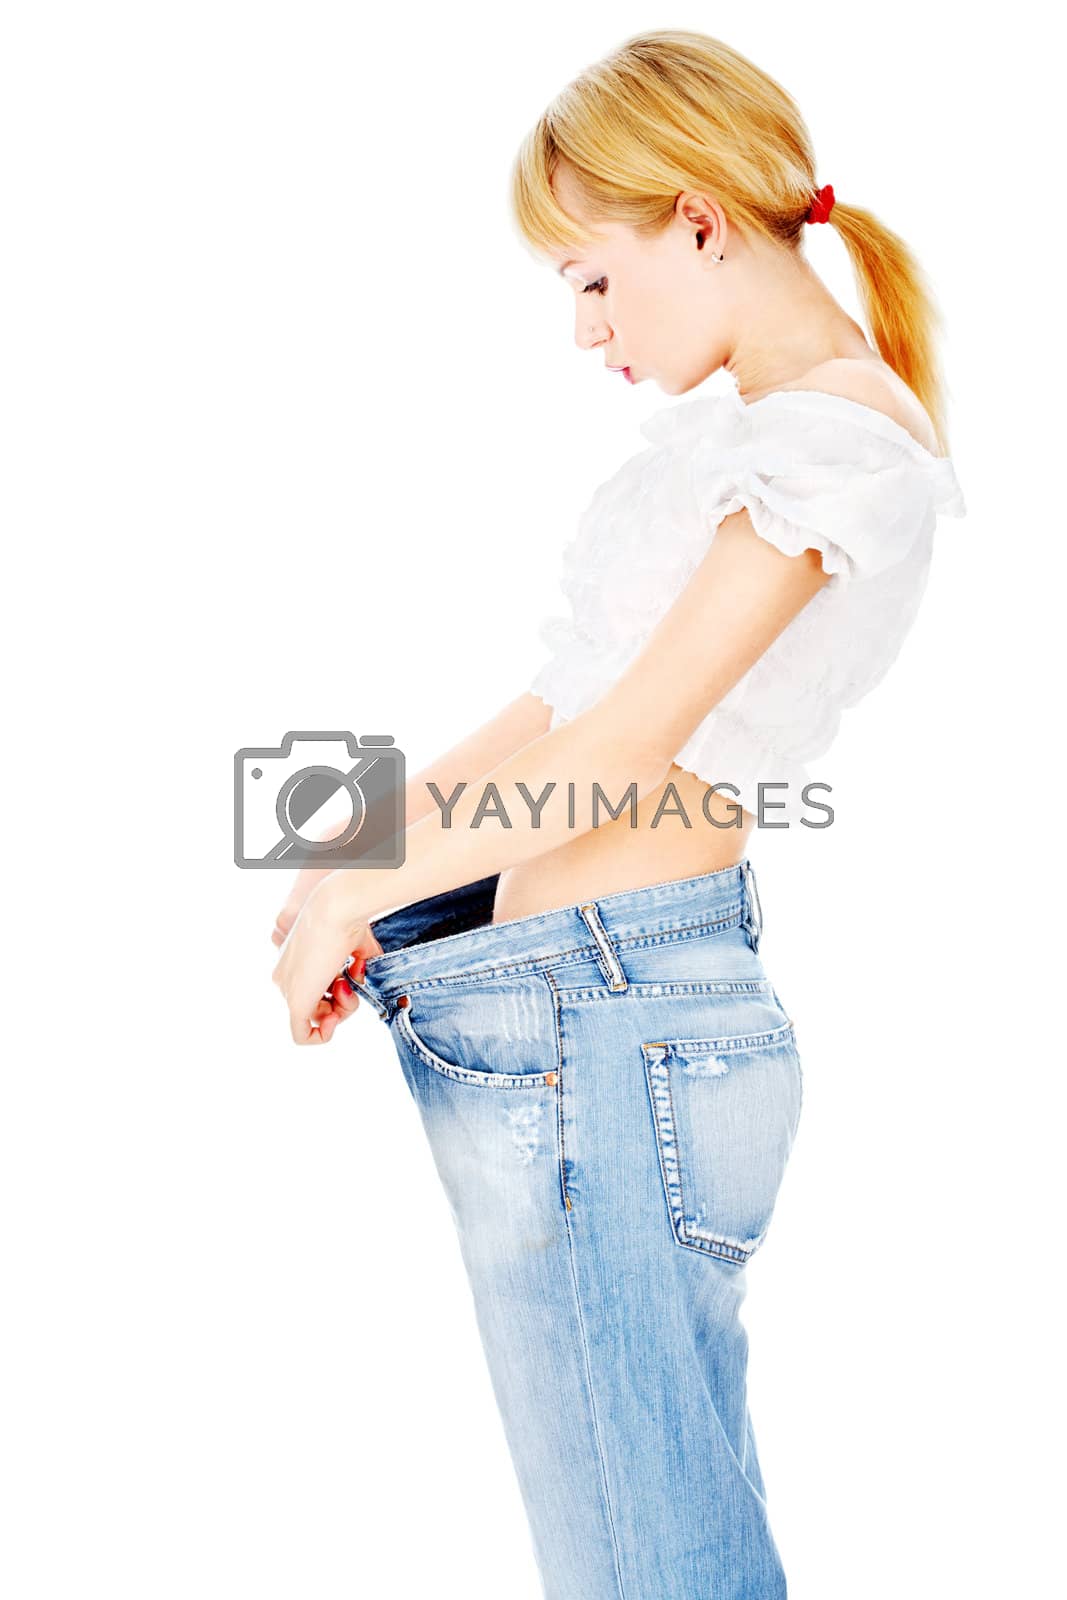 Royalty free image of Thin lady after her diet lost kilograms by imarin